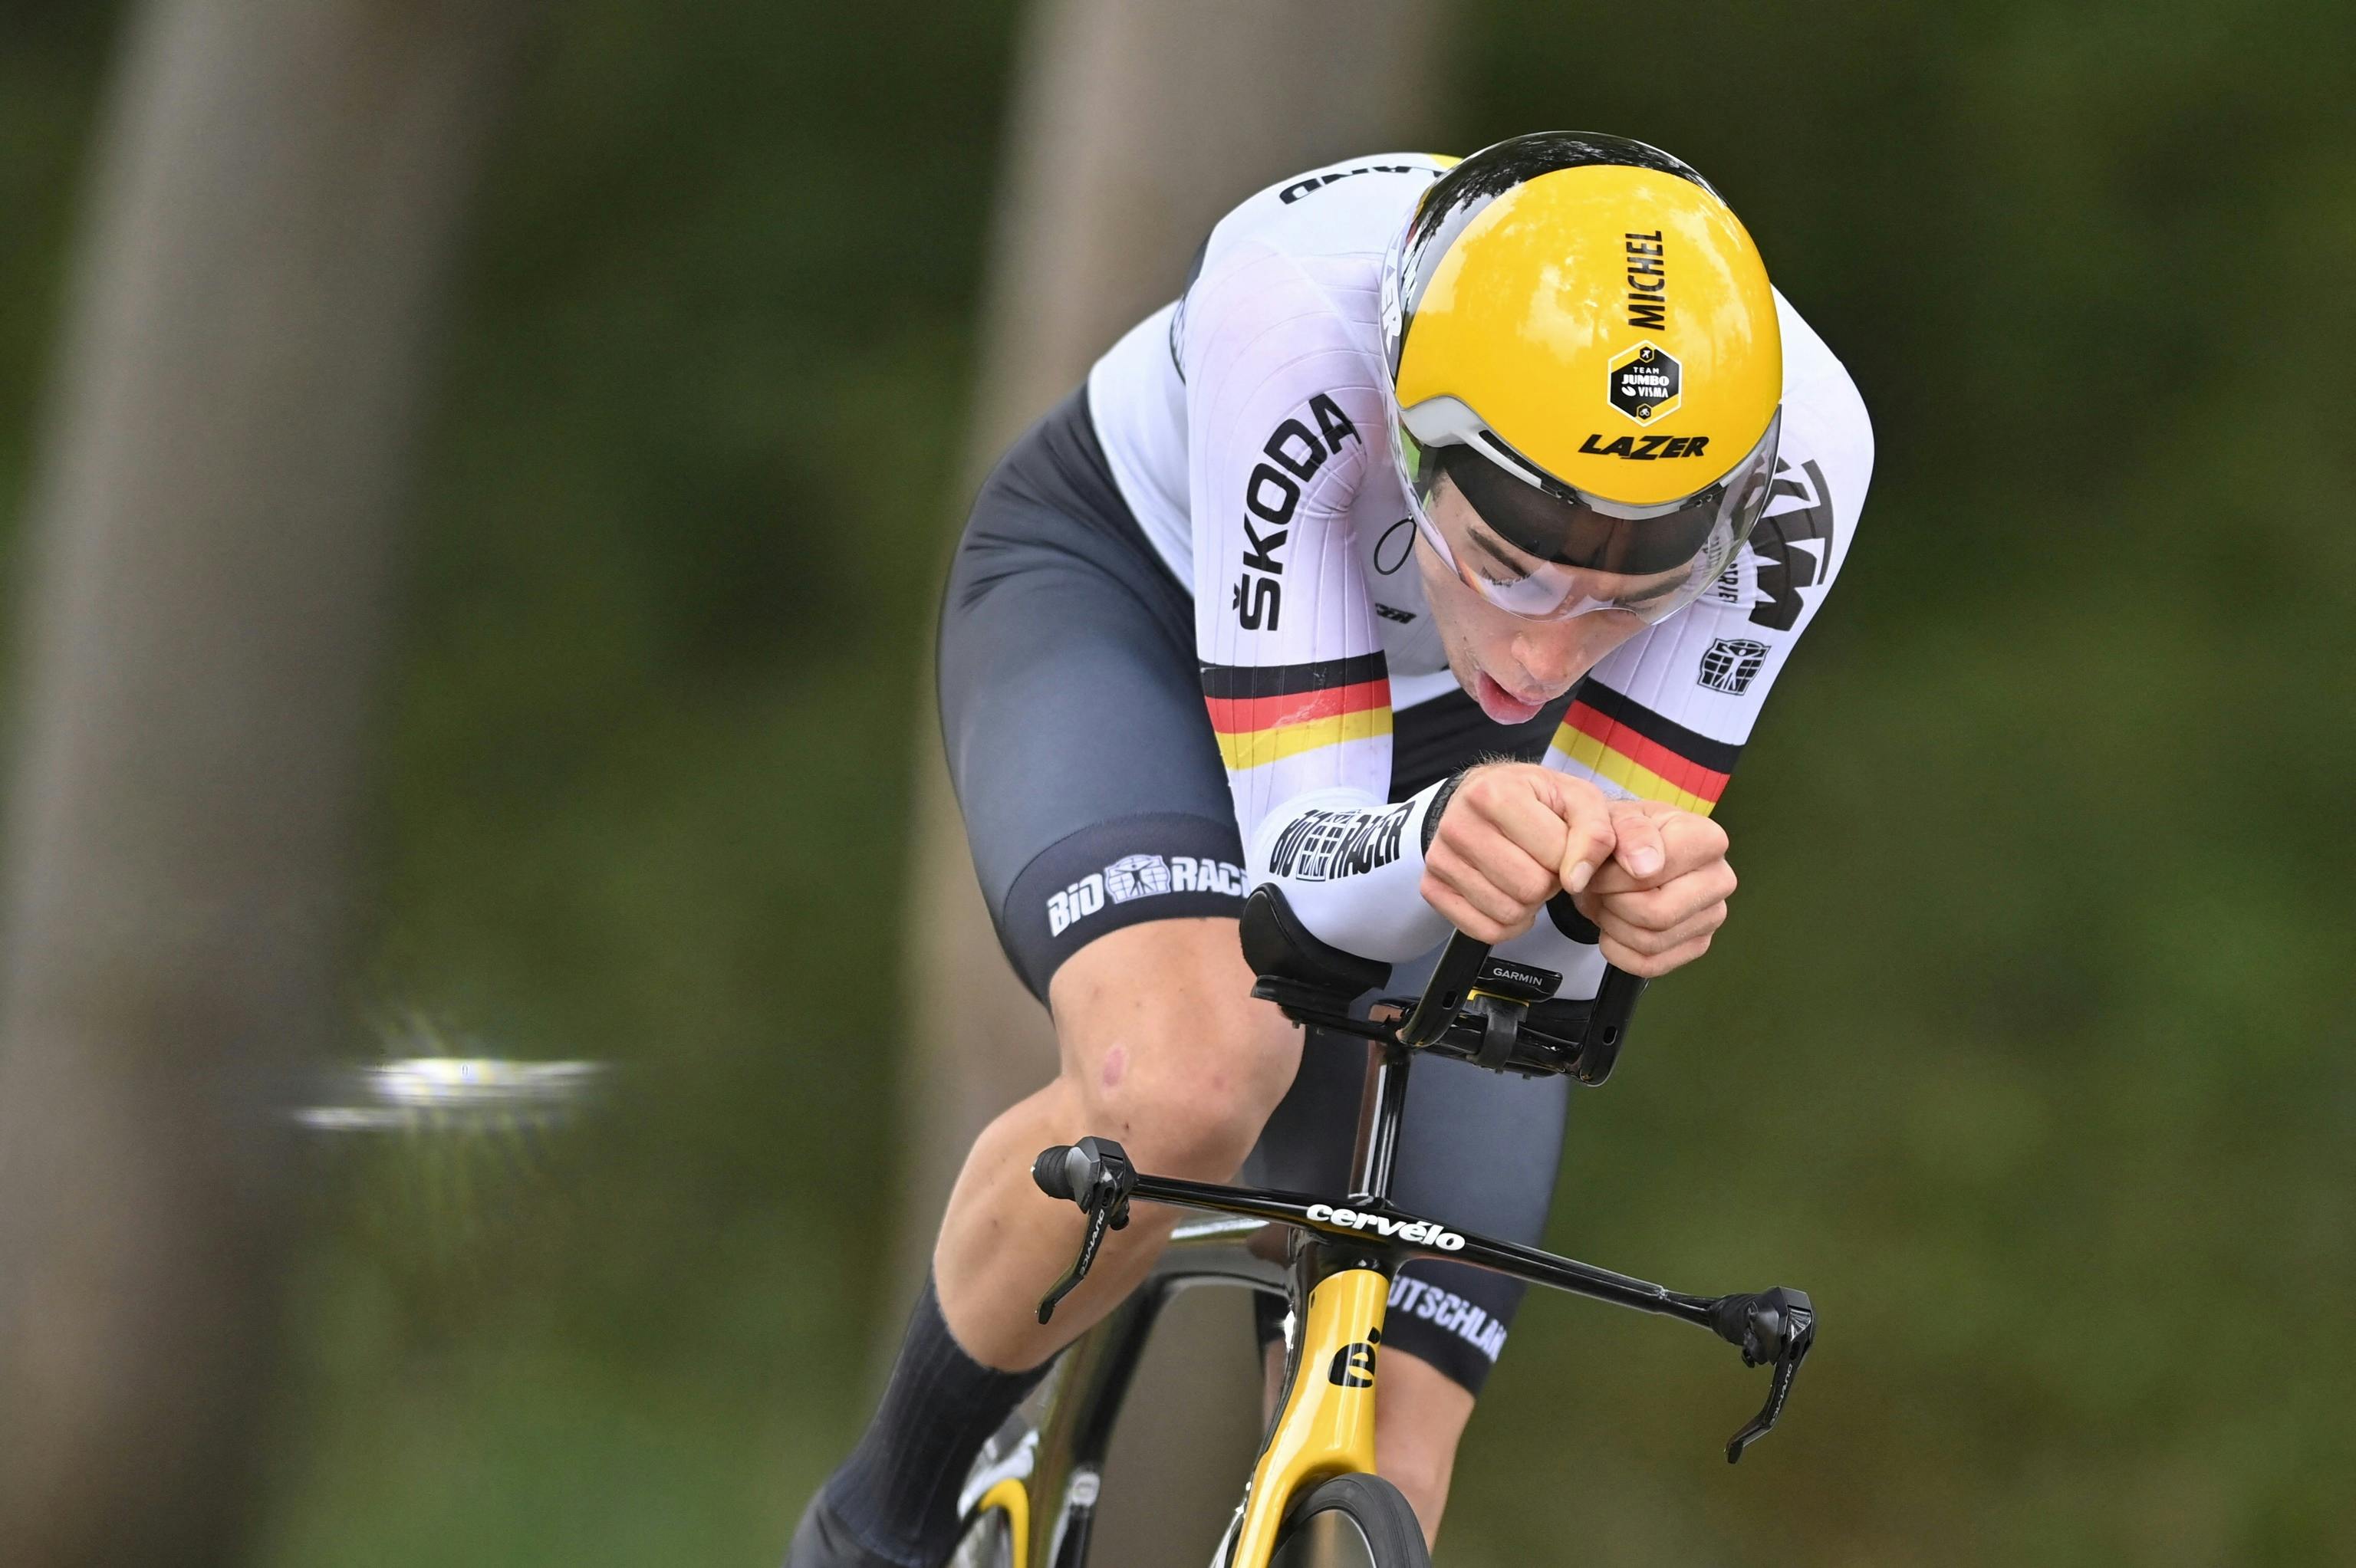 Germany's Michel Hessmann competes in the U23 men individual time trial race, 30, 3 km from Knokke-Heist to Brugge, during the UCI World Championships Road Cycling Flanders 2021, in Brugge on September 20, 2021.  DAVID STOCKMAN / BELGA / AFP